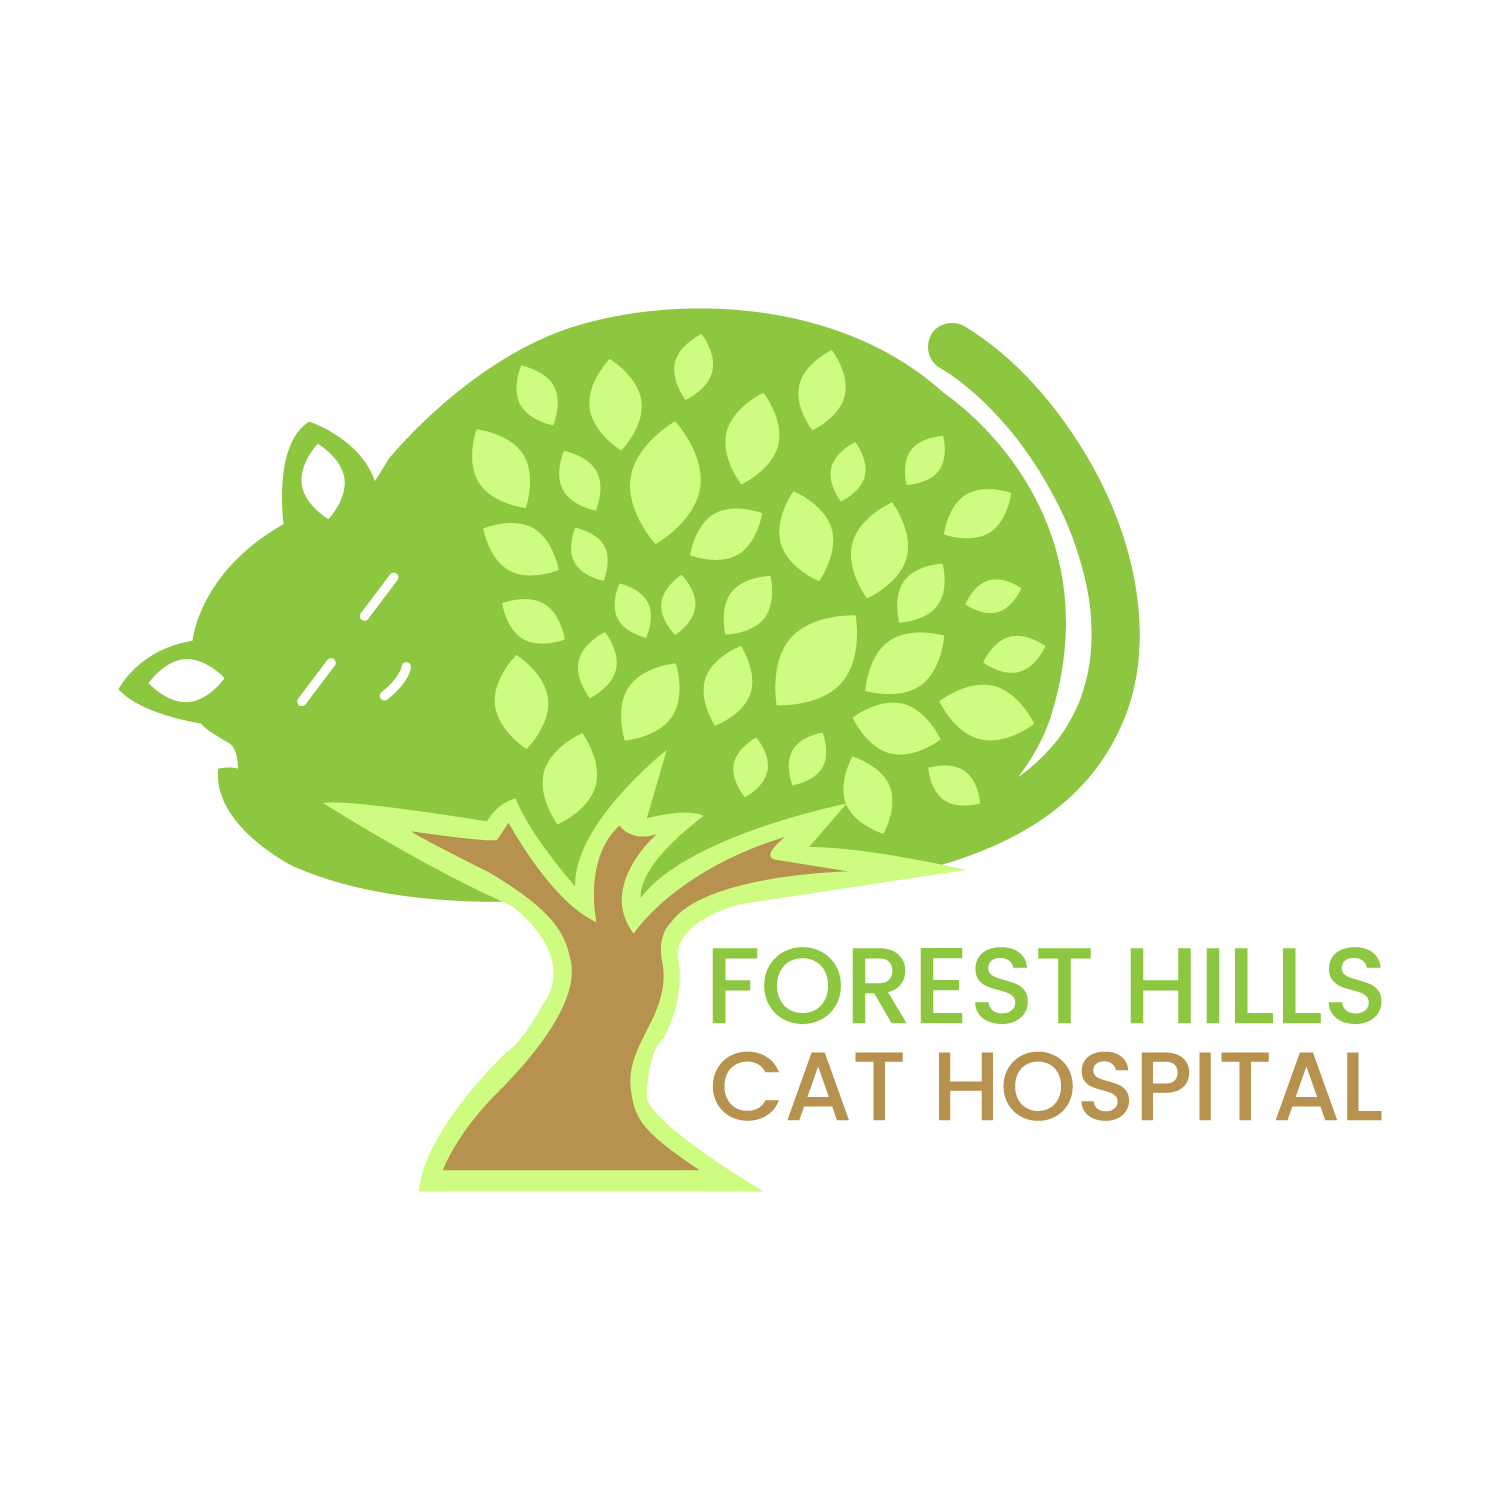 Forest Hills Cat Hospital